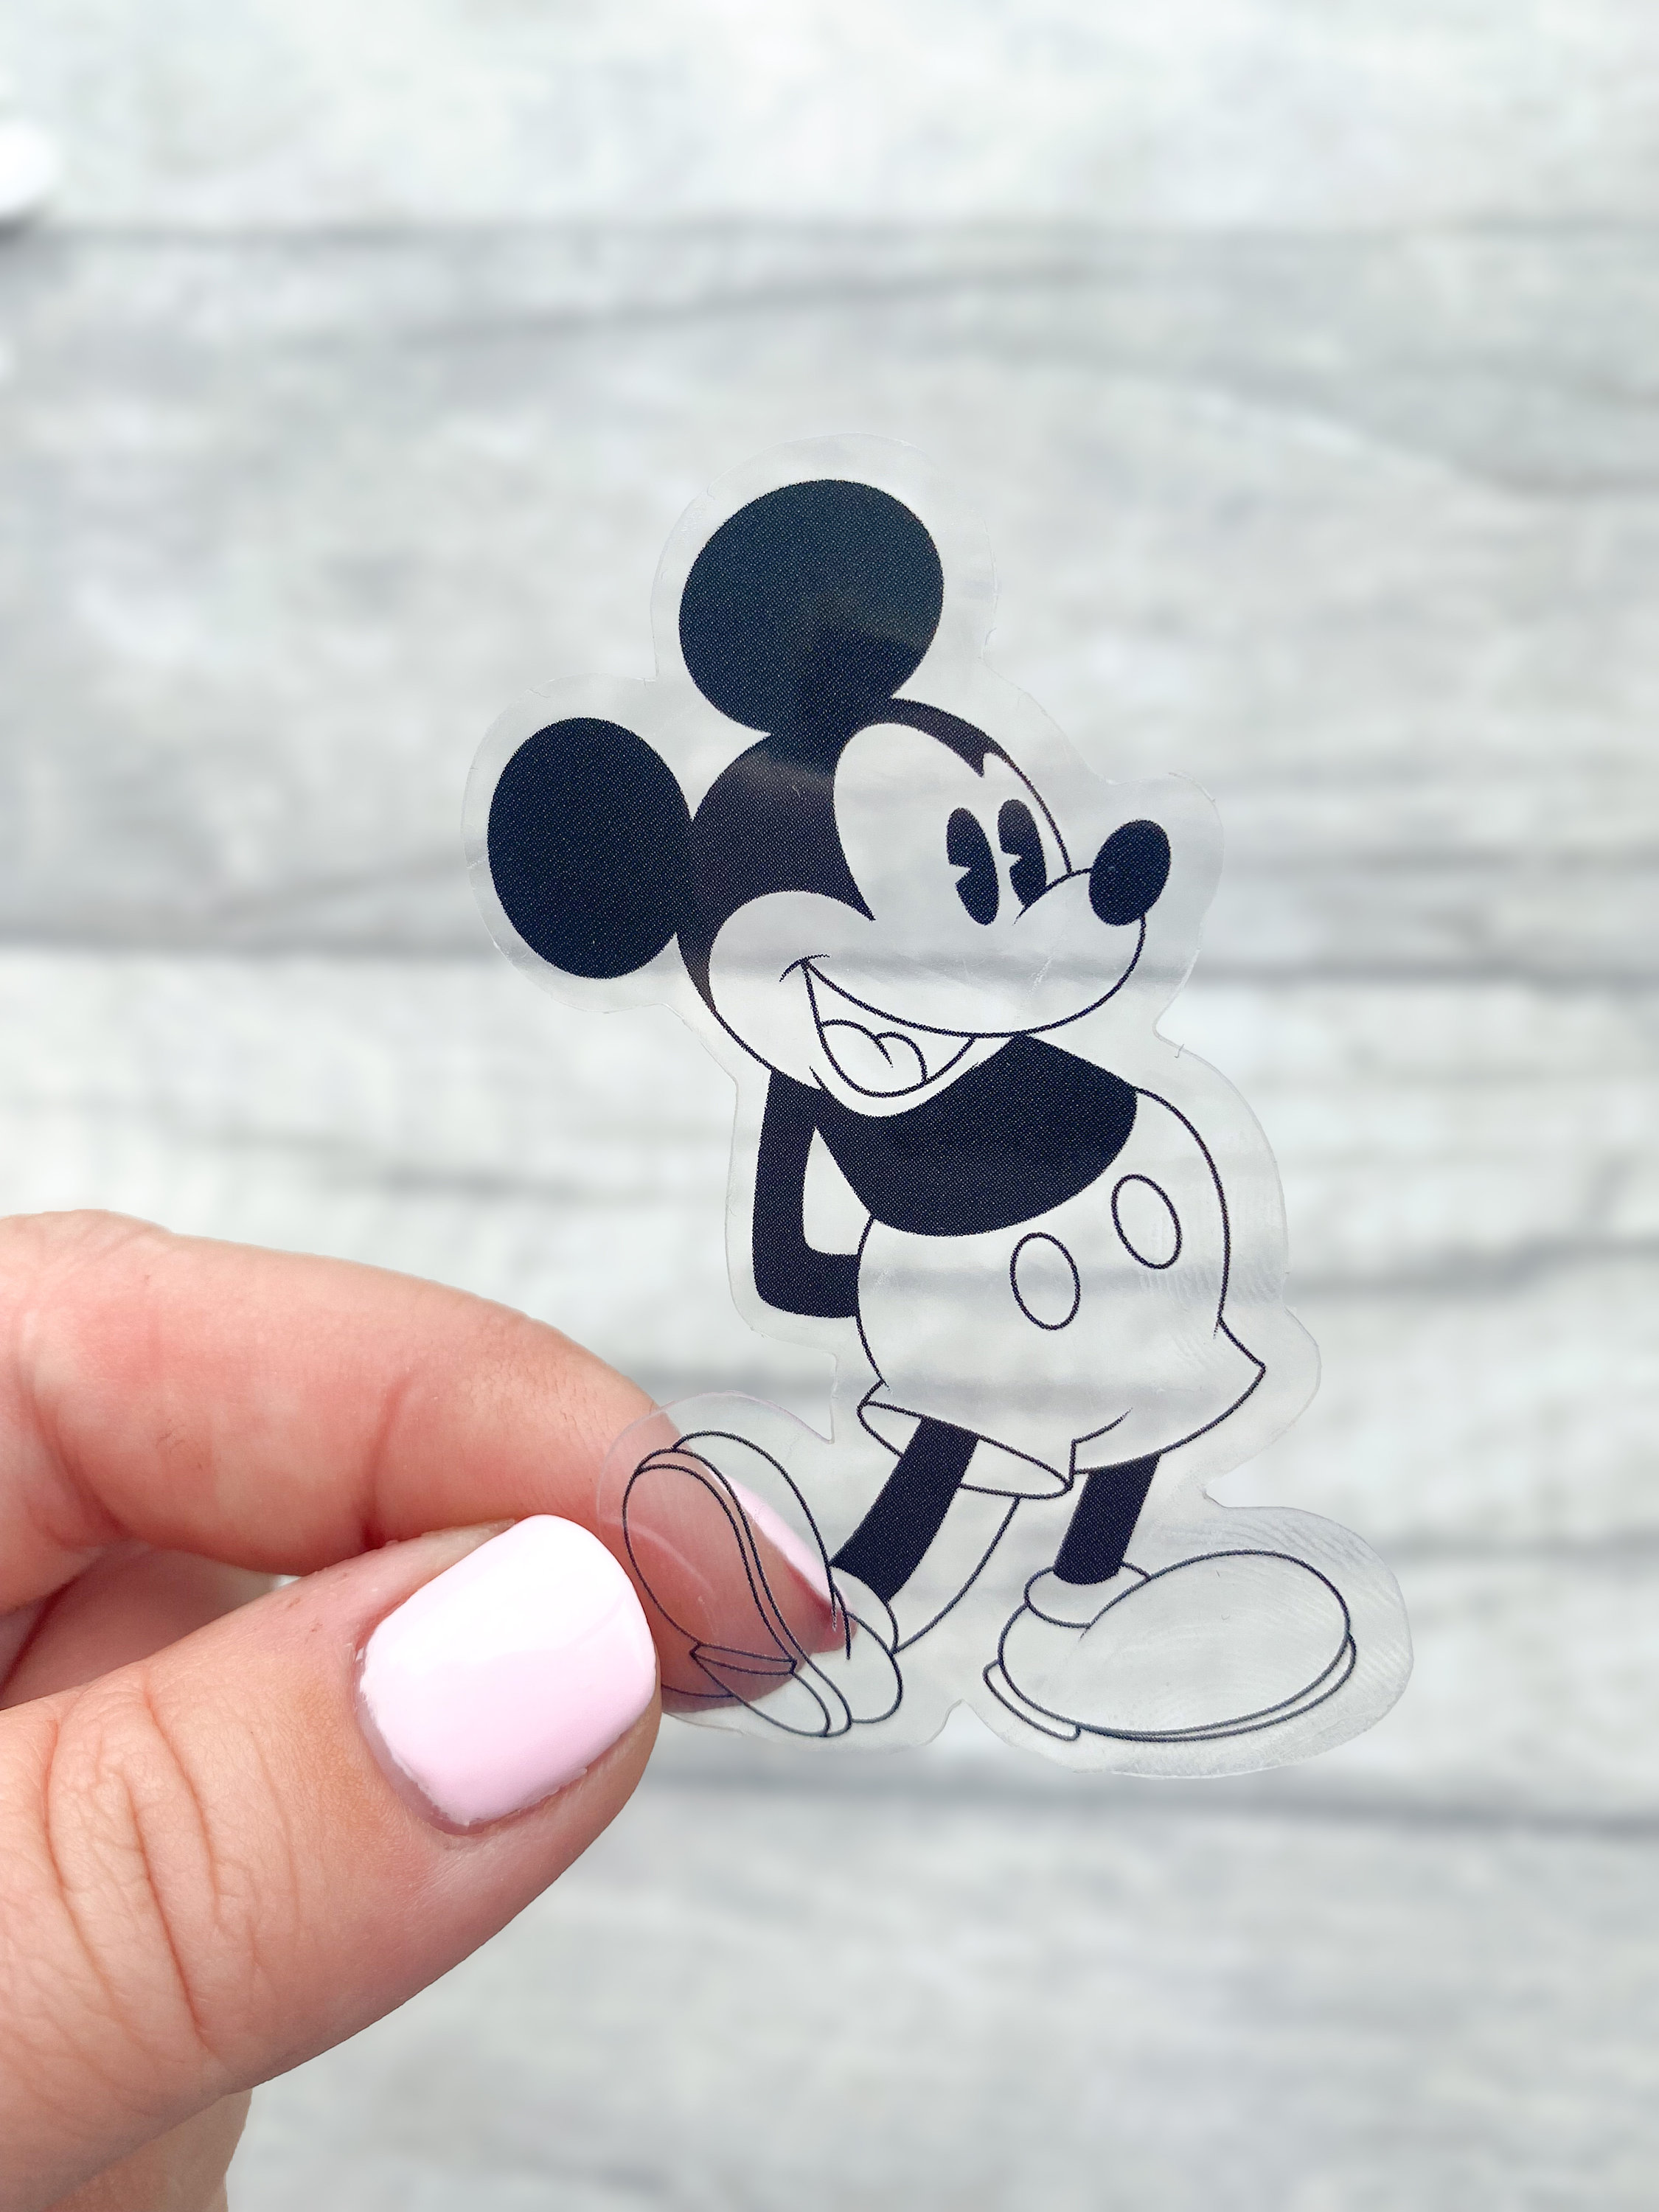 Minnie Mouse, Mickey Mouse, kiss, Disney, Disneyland, waterproof sticker,  waterproof stickers, Disney sticker